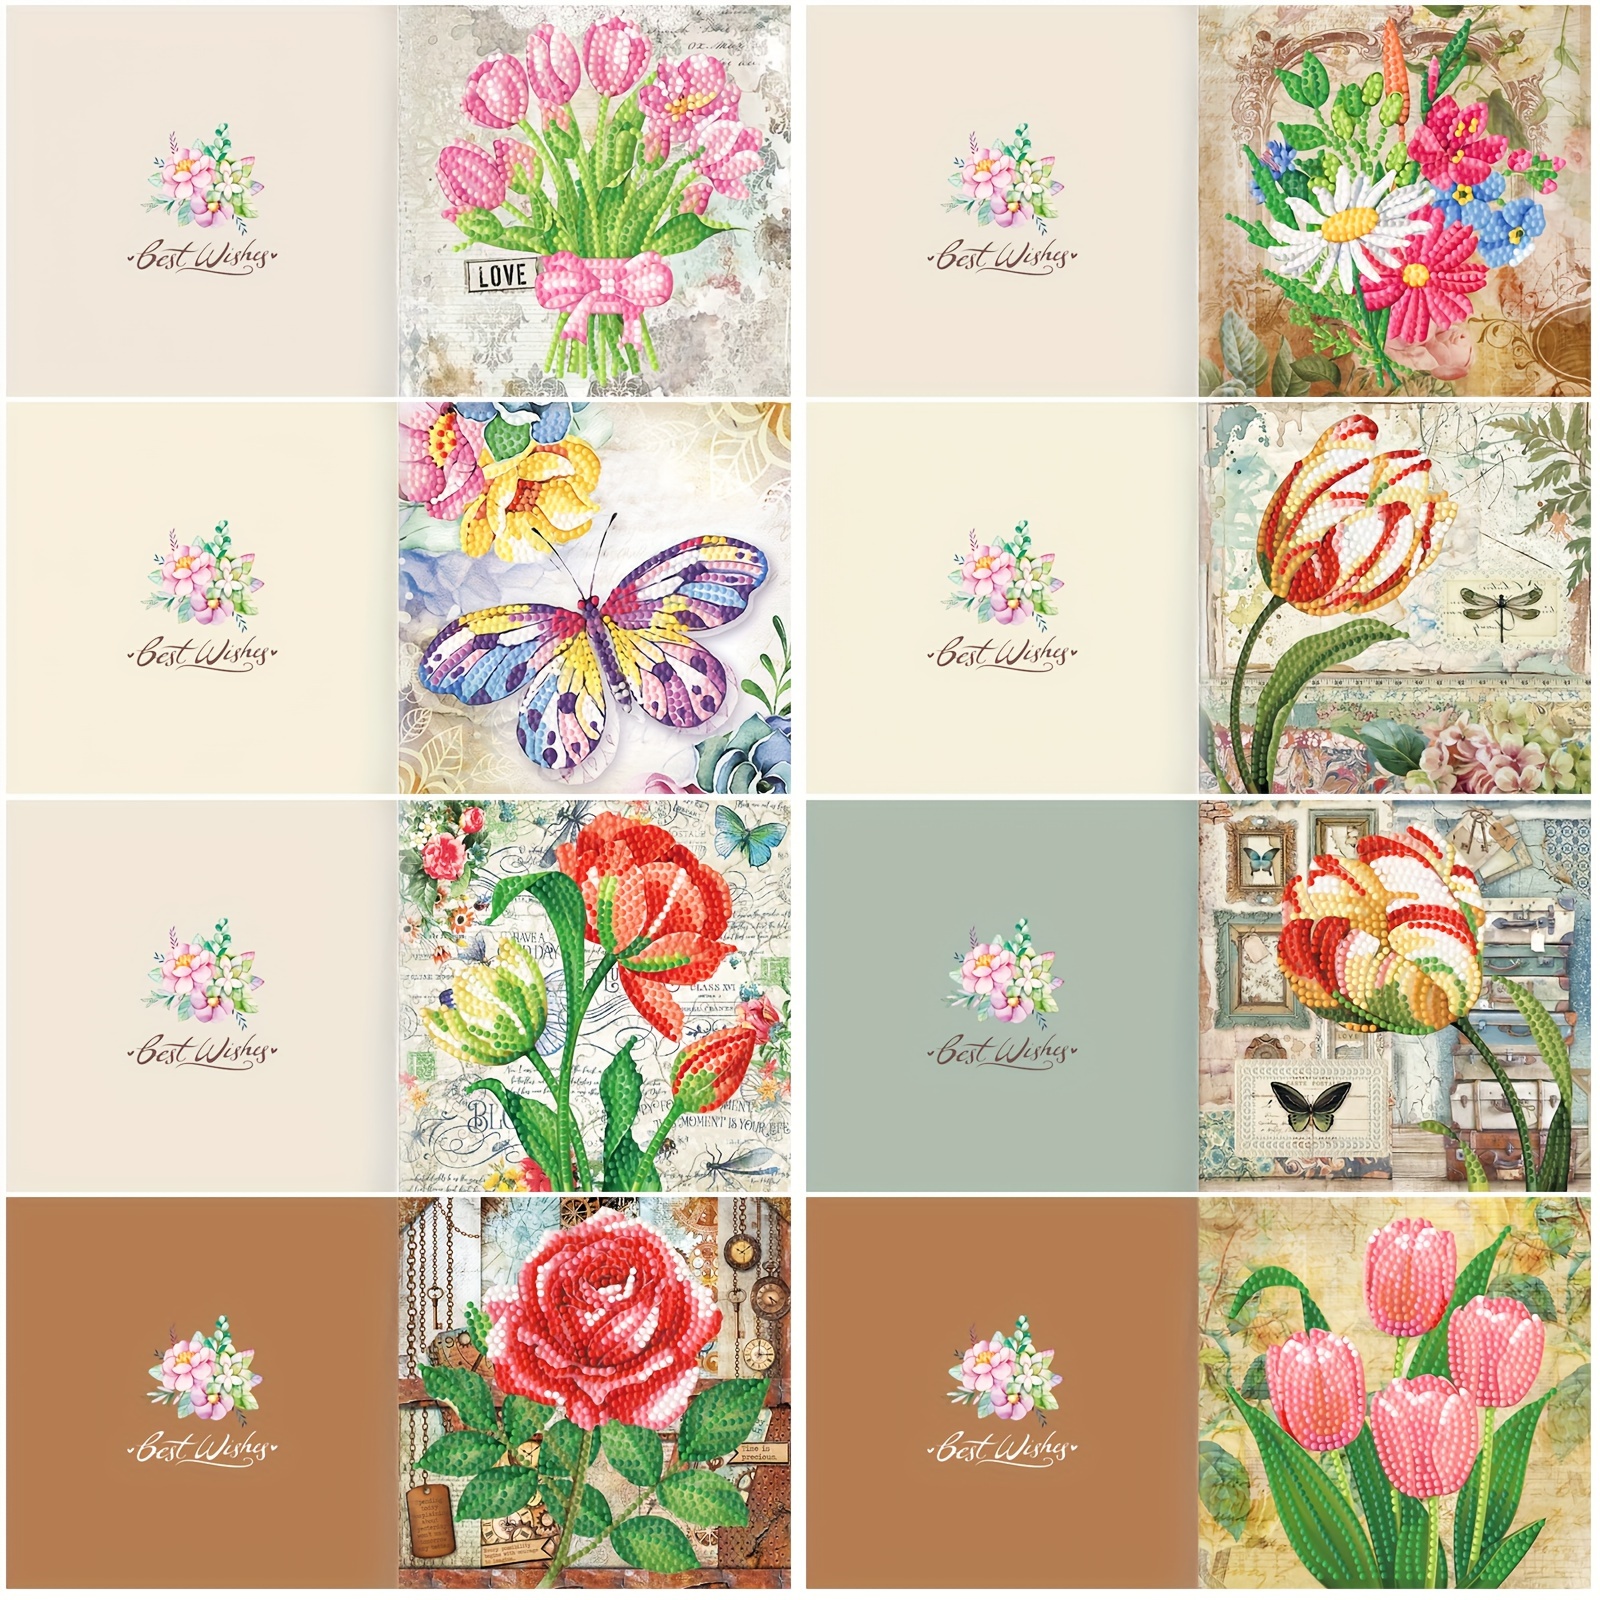  SHUWND 12 Pcs DIY Birthday Cards, 5D Diamond Art Painting  Greeting Cards, Thank You Happy Birthday Cards, Mosaic Making Greeting  Cards for Family and Friends : 藝術、手工藝與縫紉